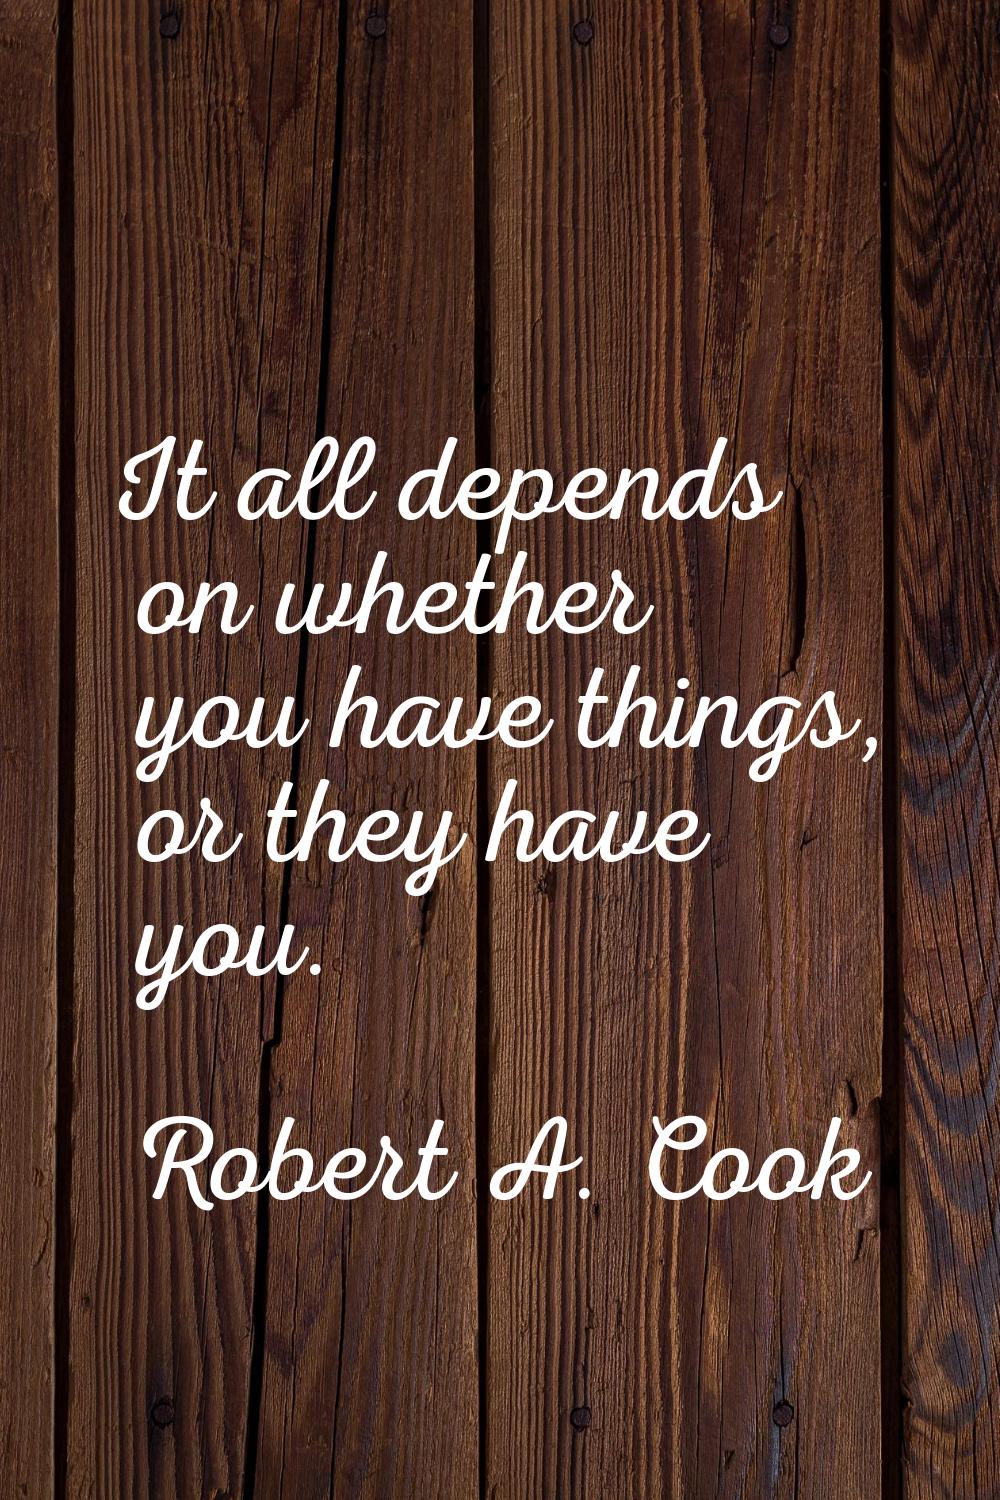 It all depends on whether you have things, or they have you.